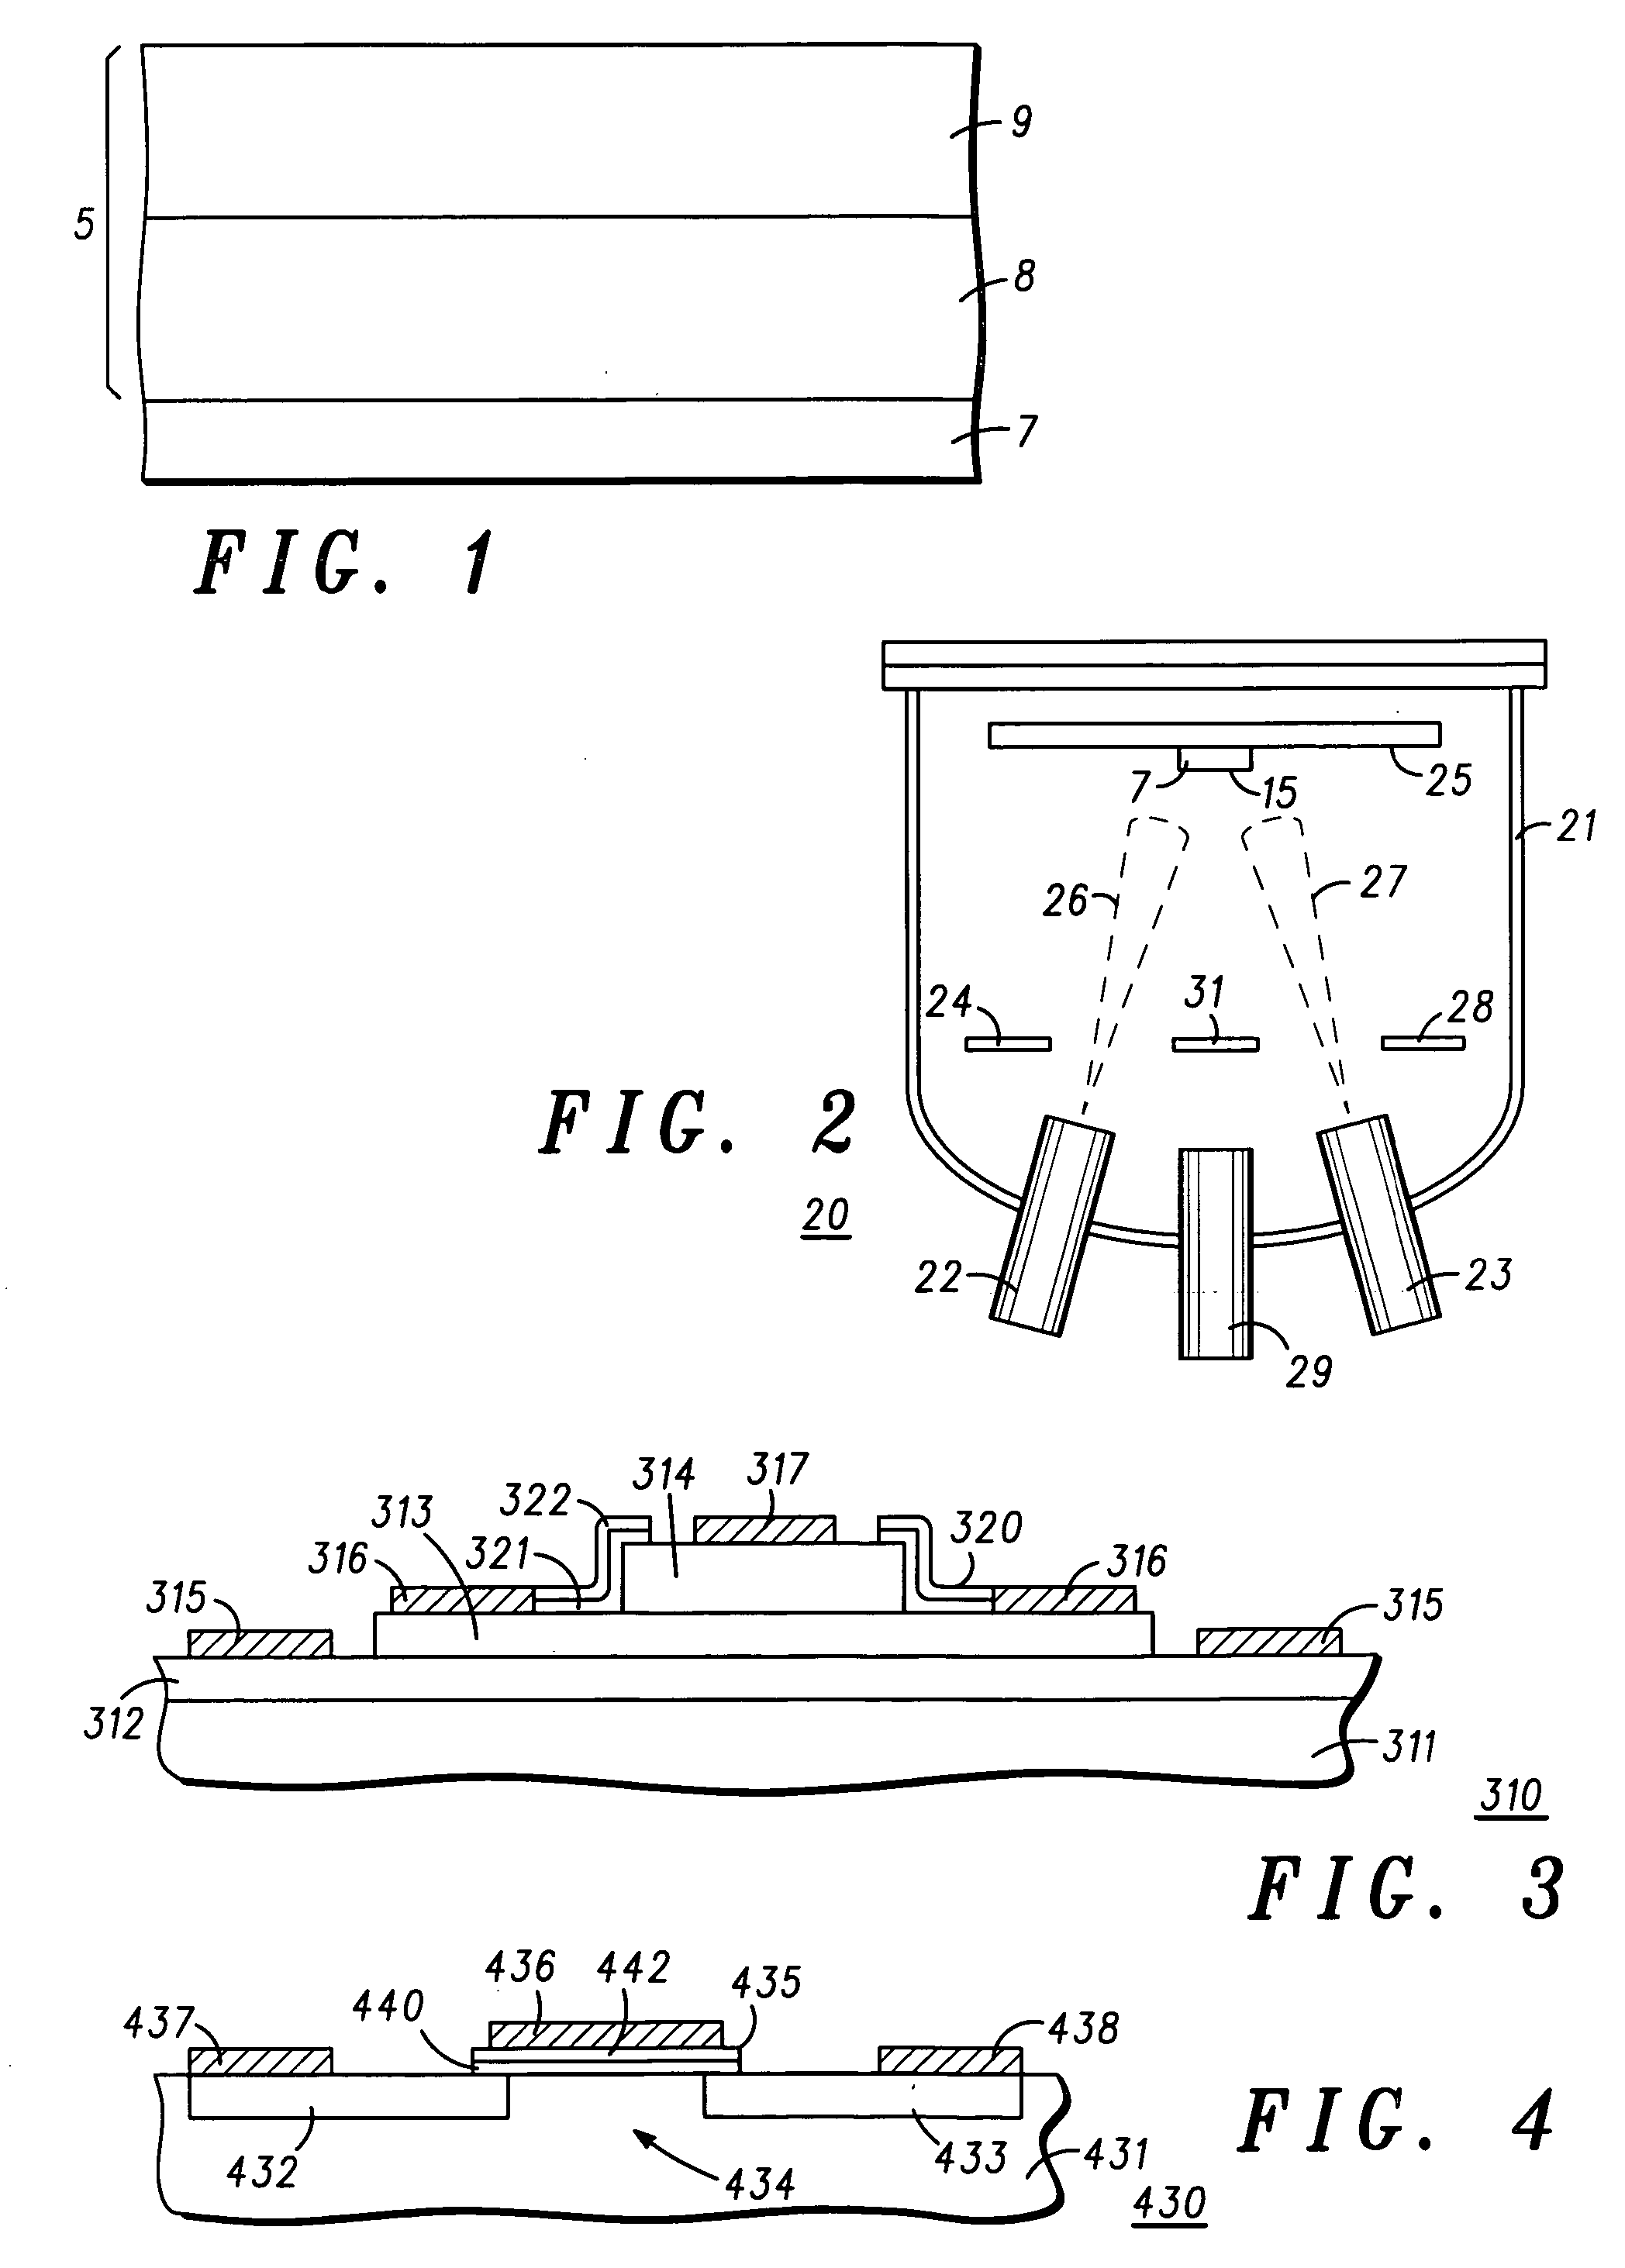 Article comprising an oxide layer on a GaAs-based semiconductor structure and method of forming same